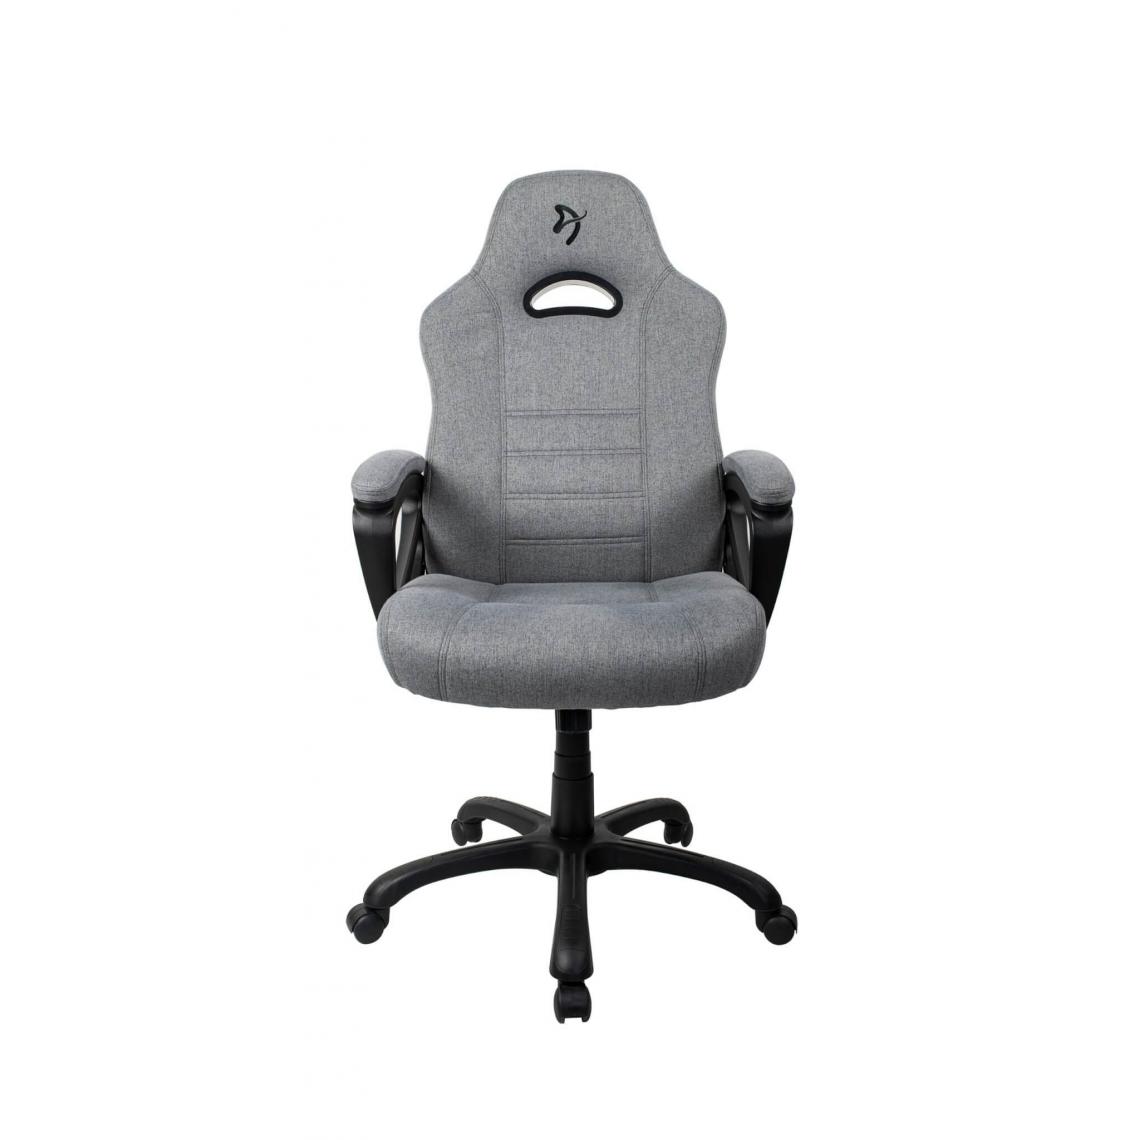 Arozzi - Fauteuil gaming Arozzi Enzo Soft Fabric gris - Chaise gamer